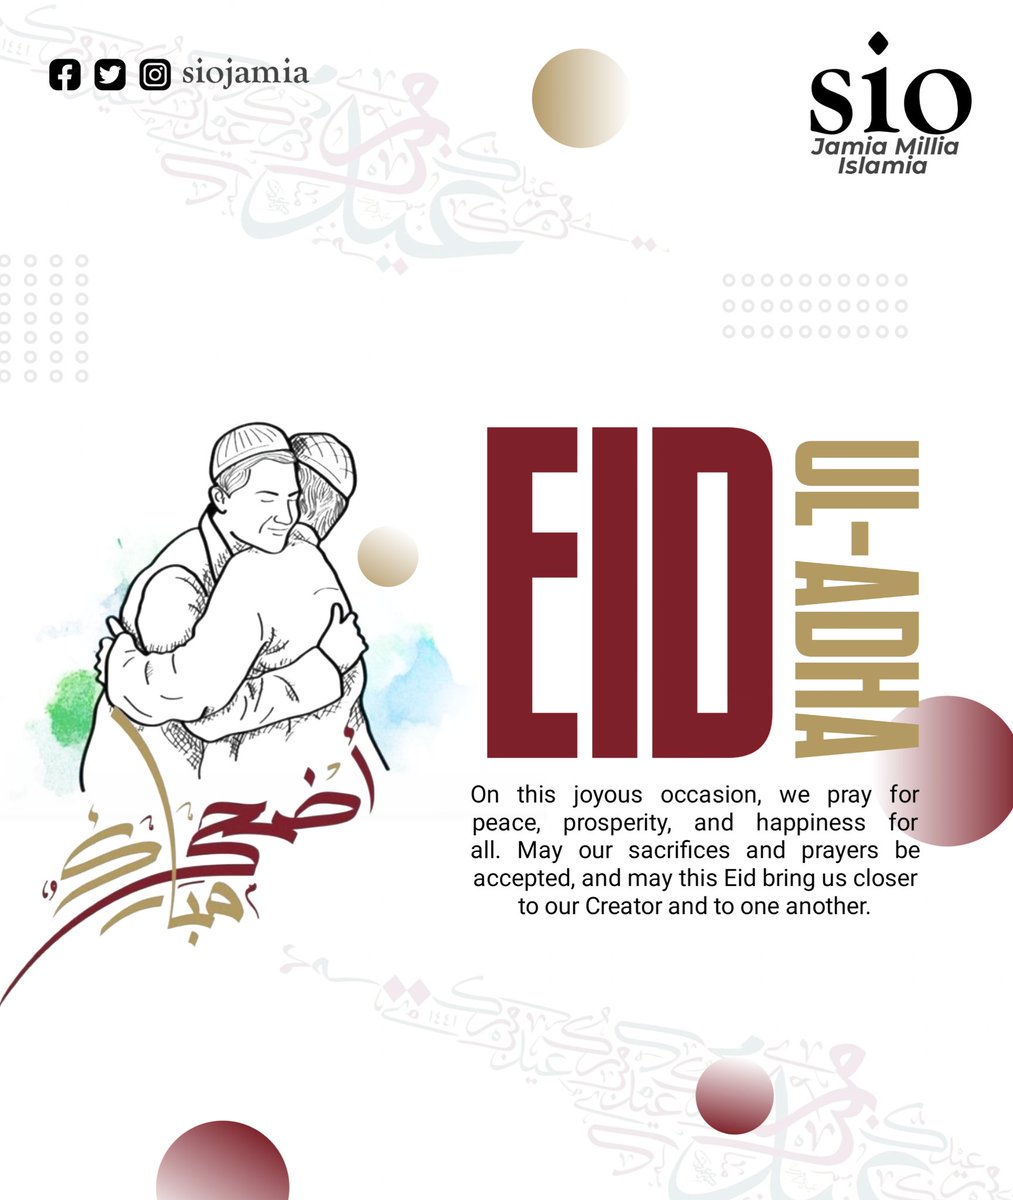 We wish you and your family a blessed Eidul Azha filled with happiness, peace, and abundant blessings. May your sacrifices be accepted, and may your hearts be filled with the joy of Eid.

SIO Jamia Millia Islamia